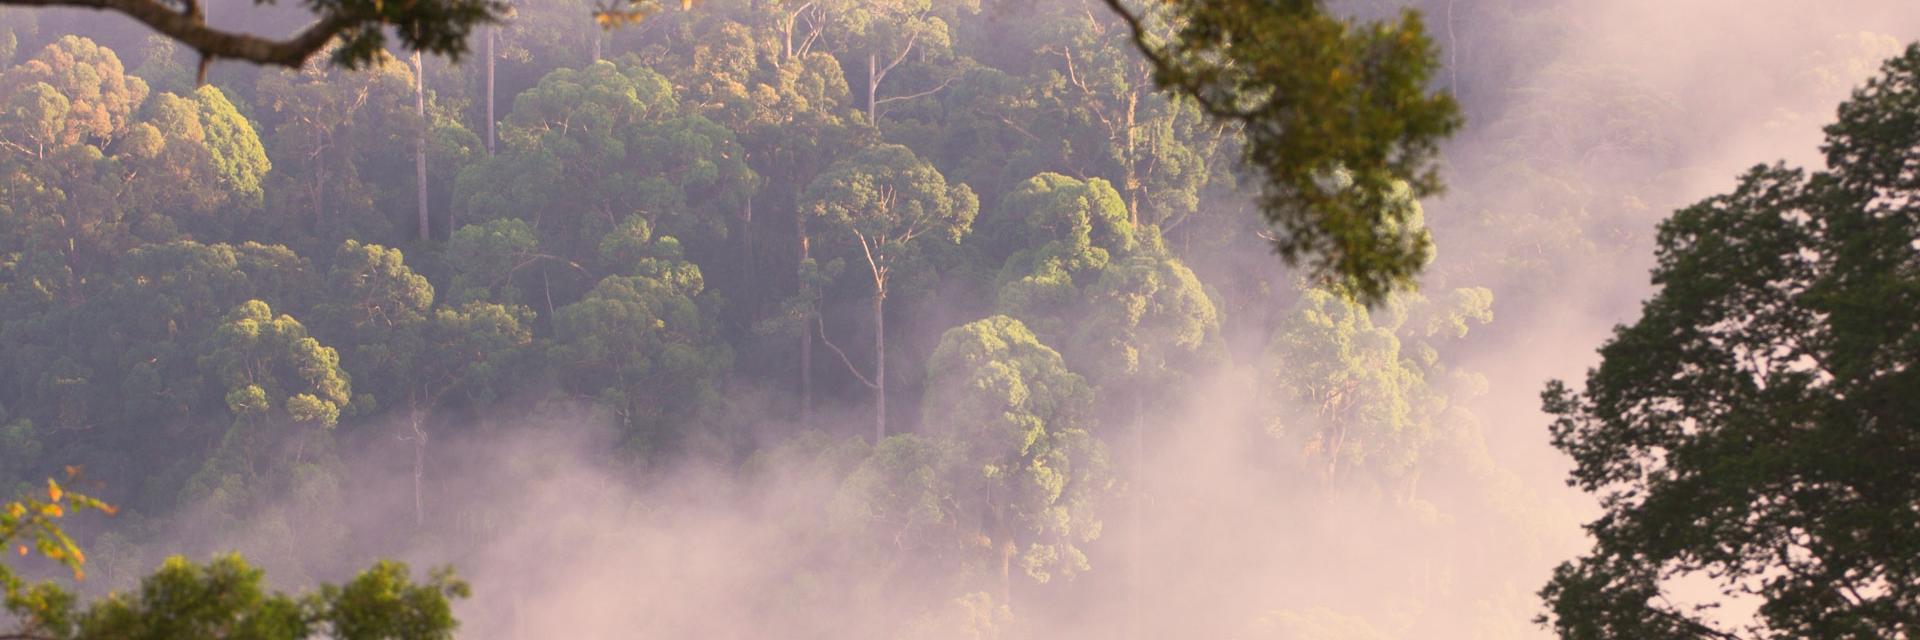 Early morning mist rising from the canopy of the lowland forest in the Danum Valley, Sabah, Borneo.